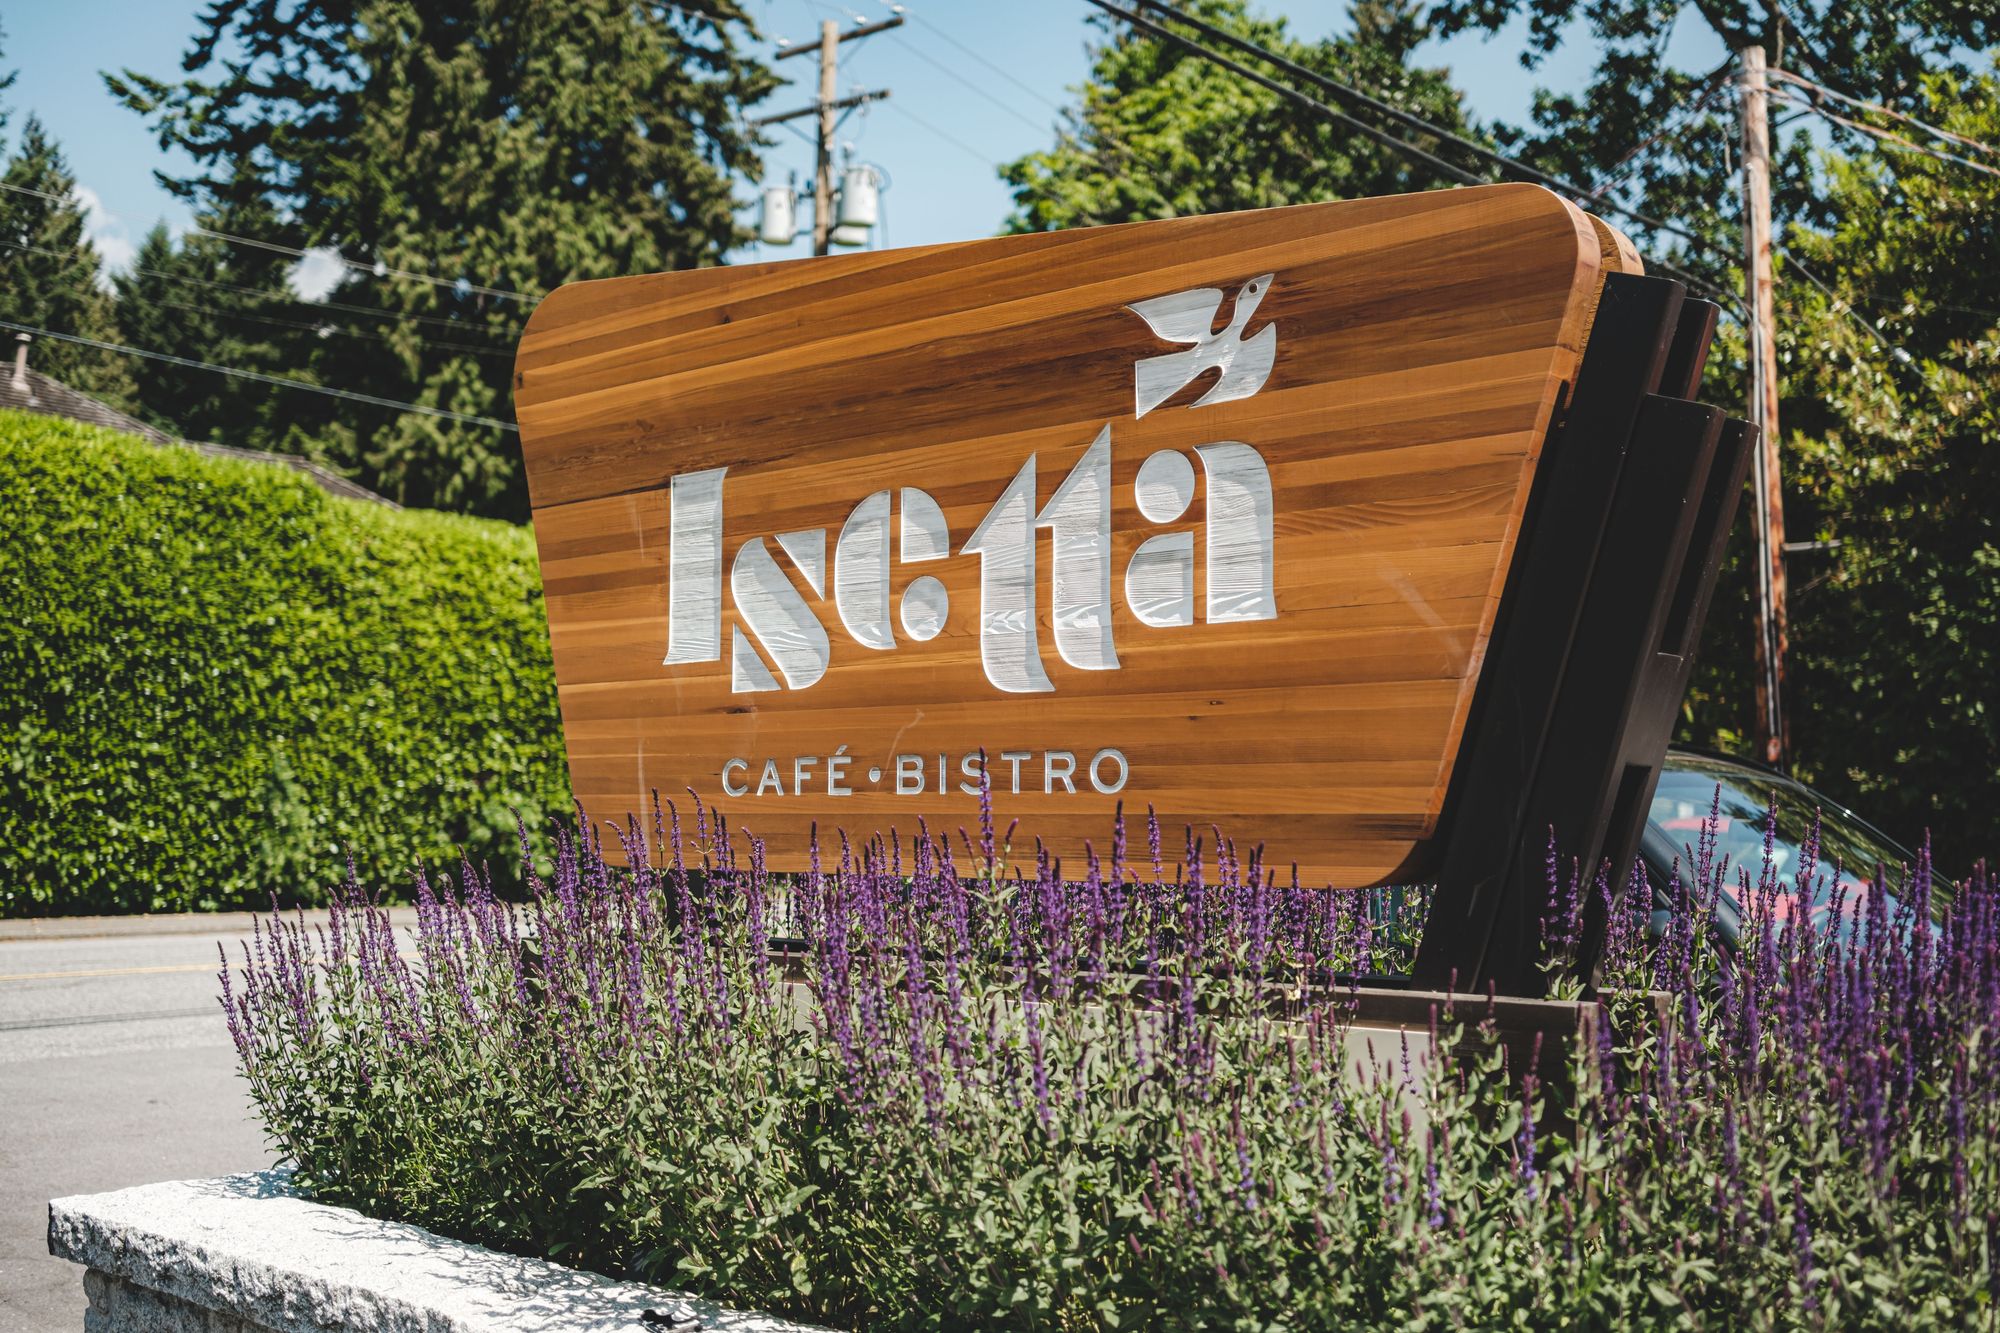 Isetta Cafe in West Vancouver